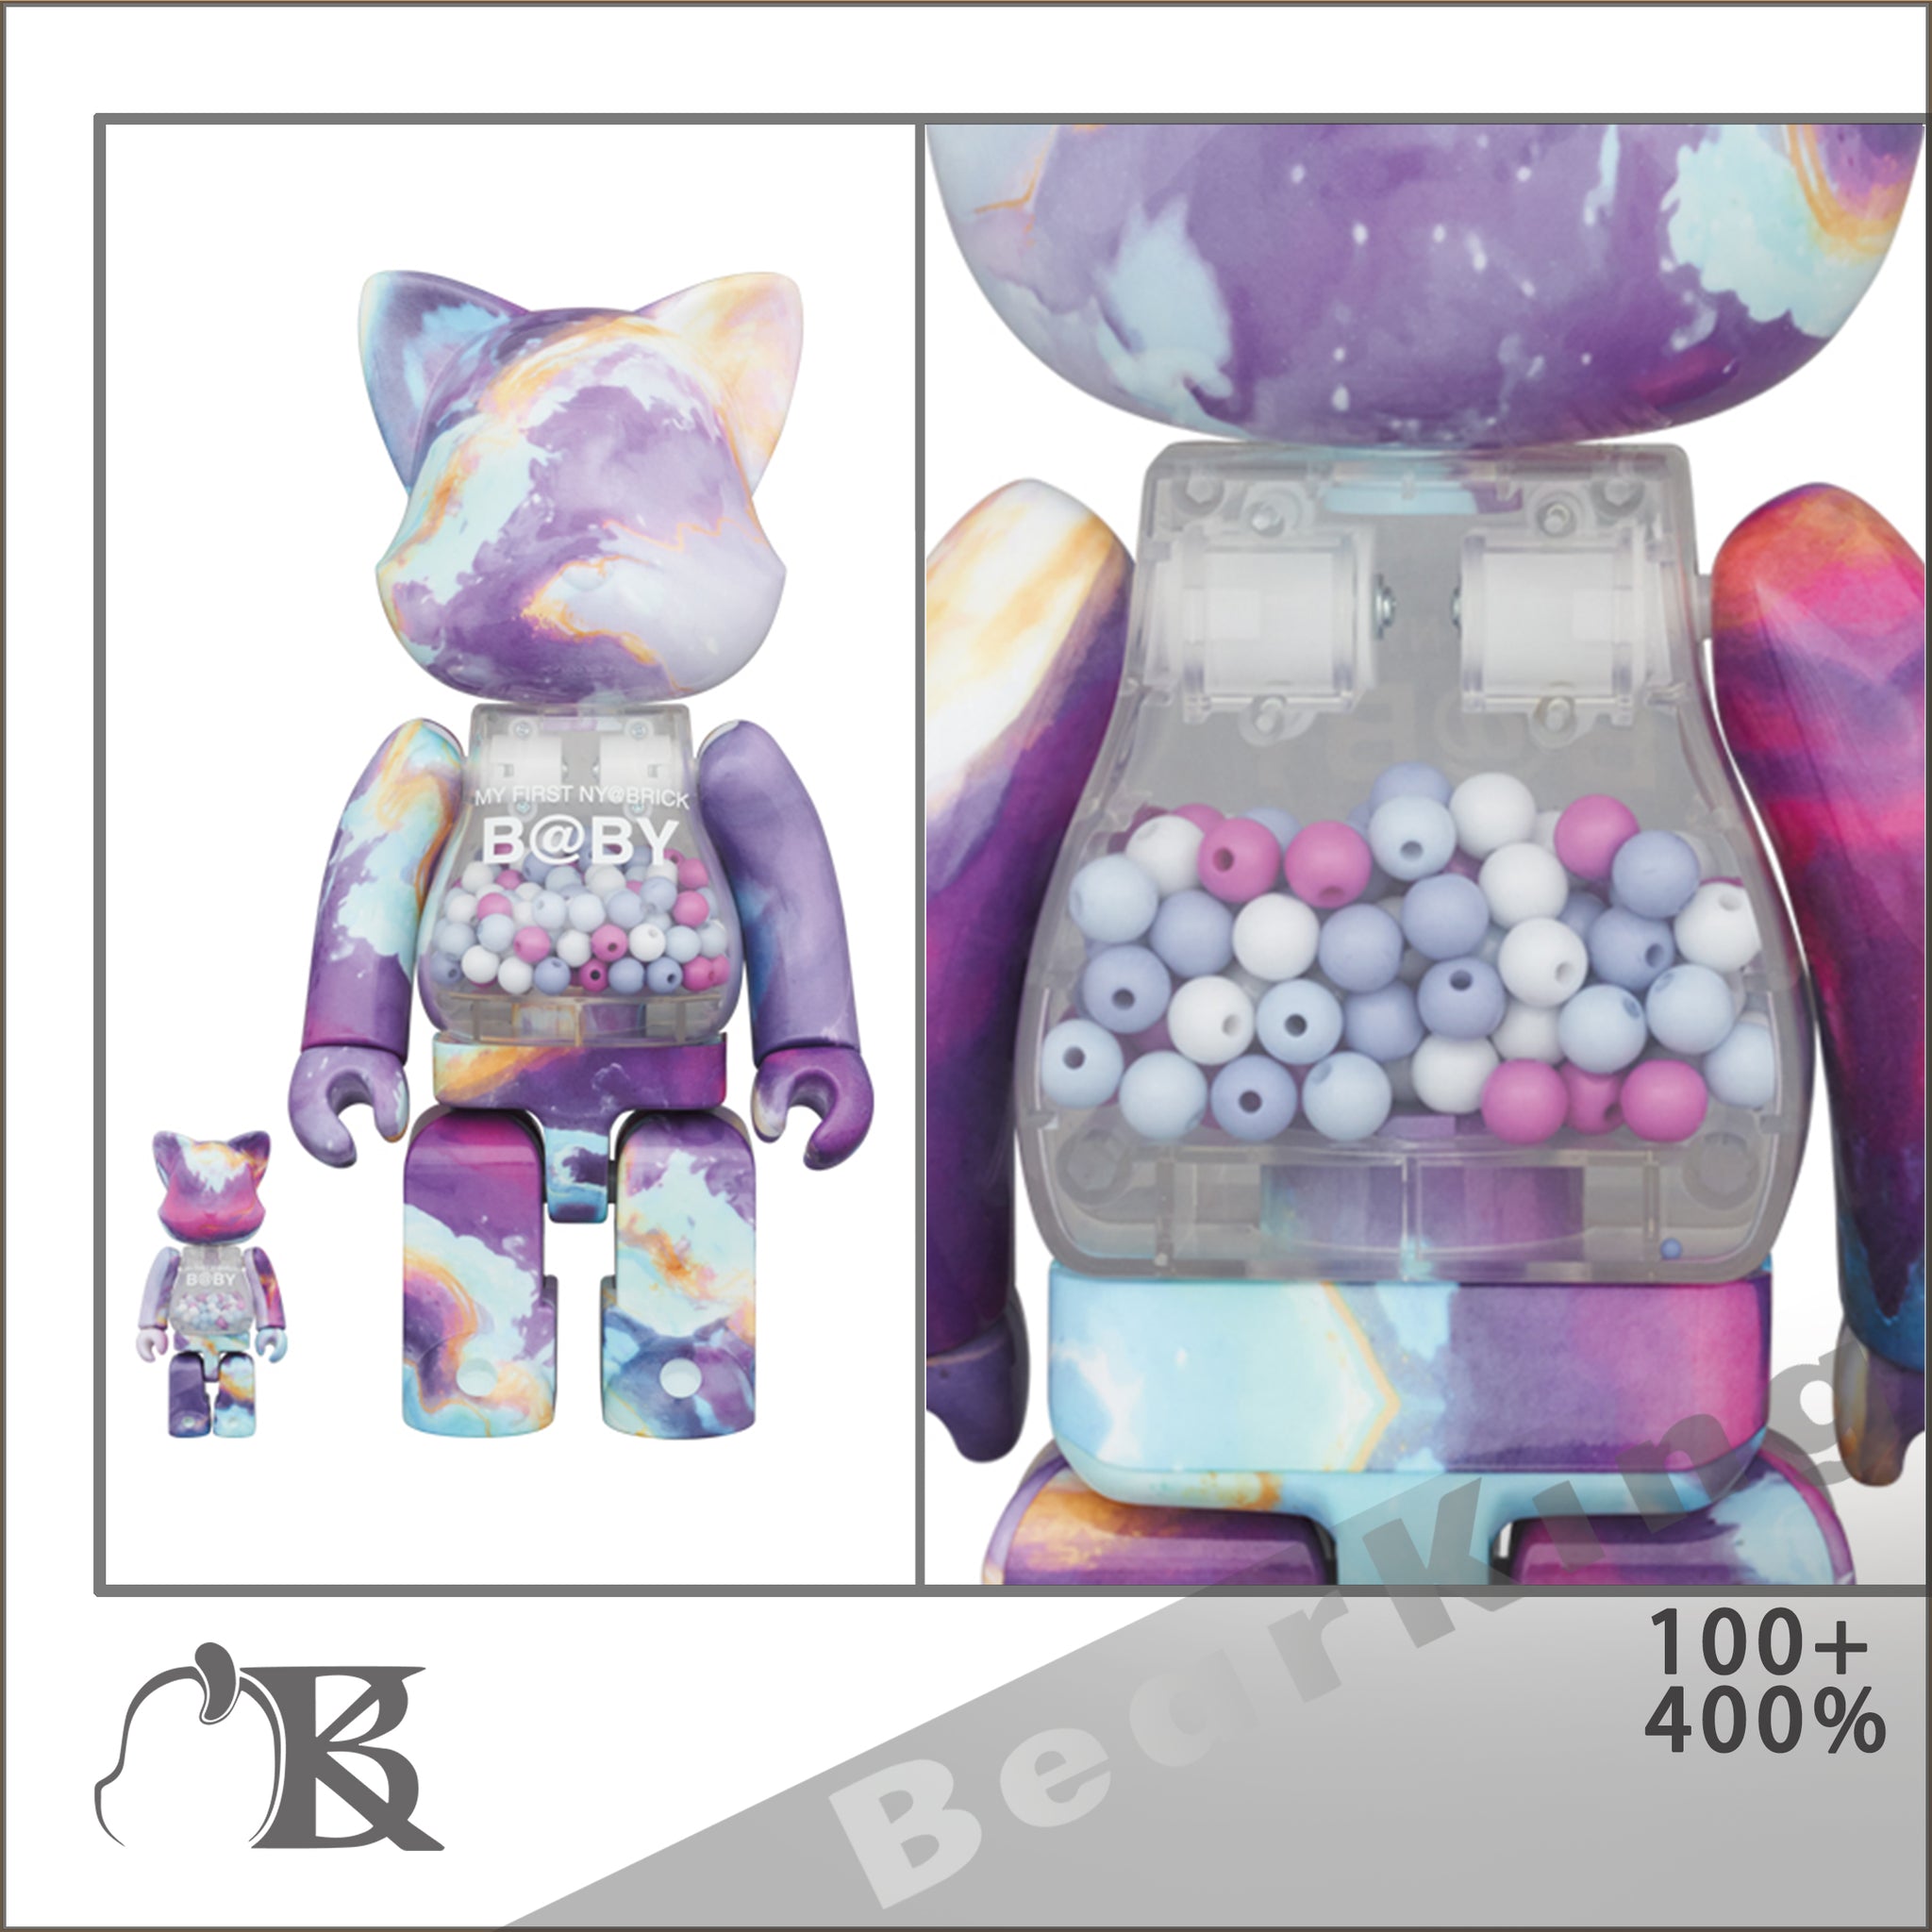 MY FIRST BE@RBRICK B@BY MARBLE Ver. 1000％ 千秋Baby 雲石